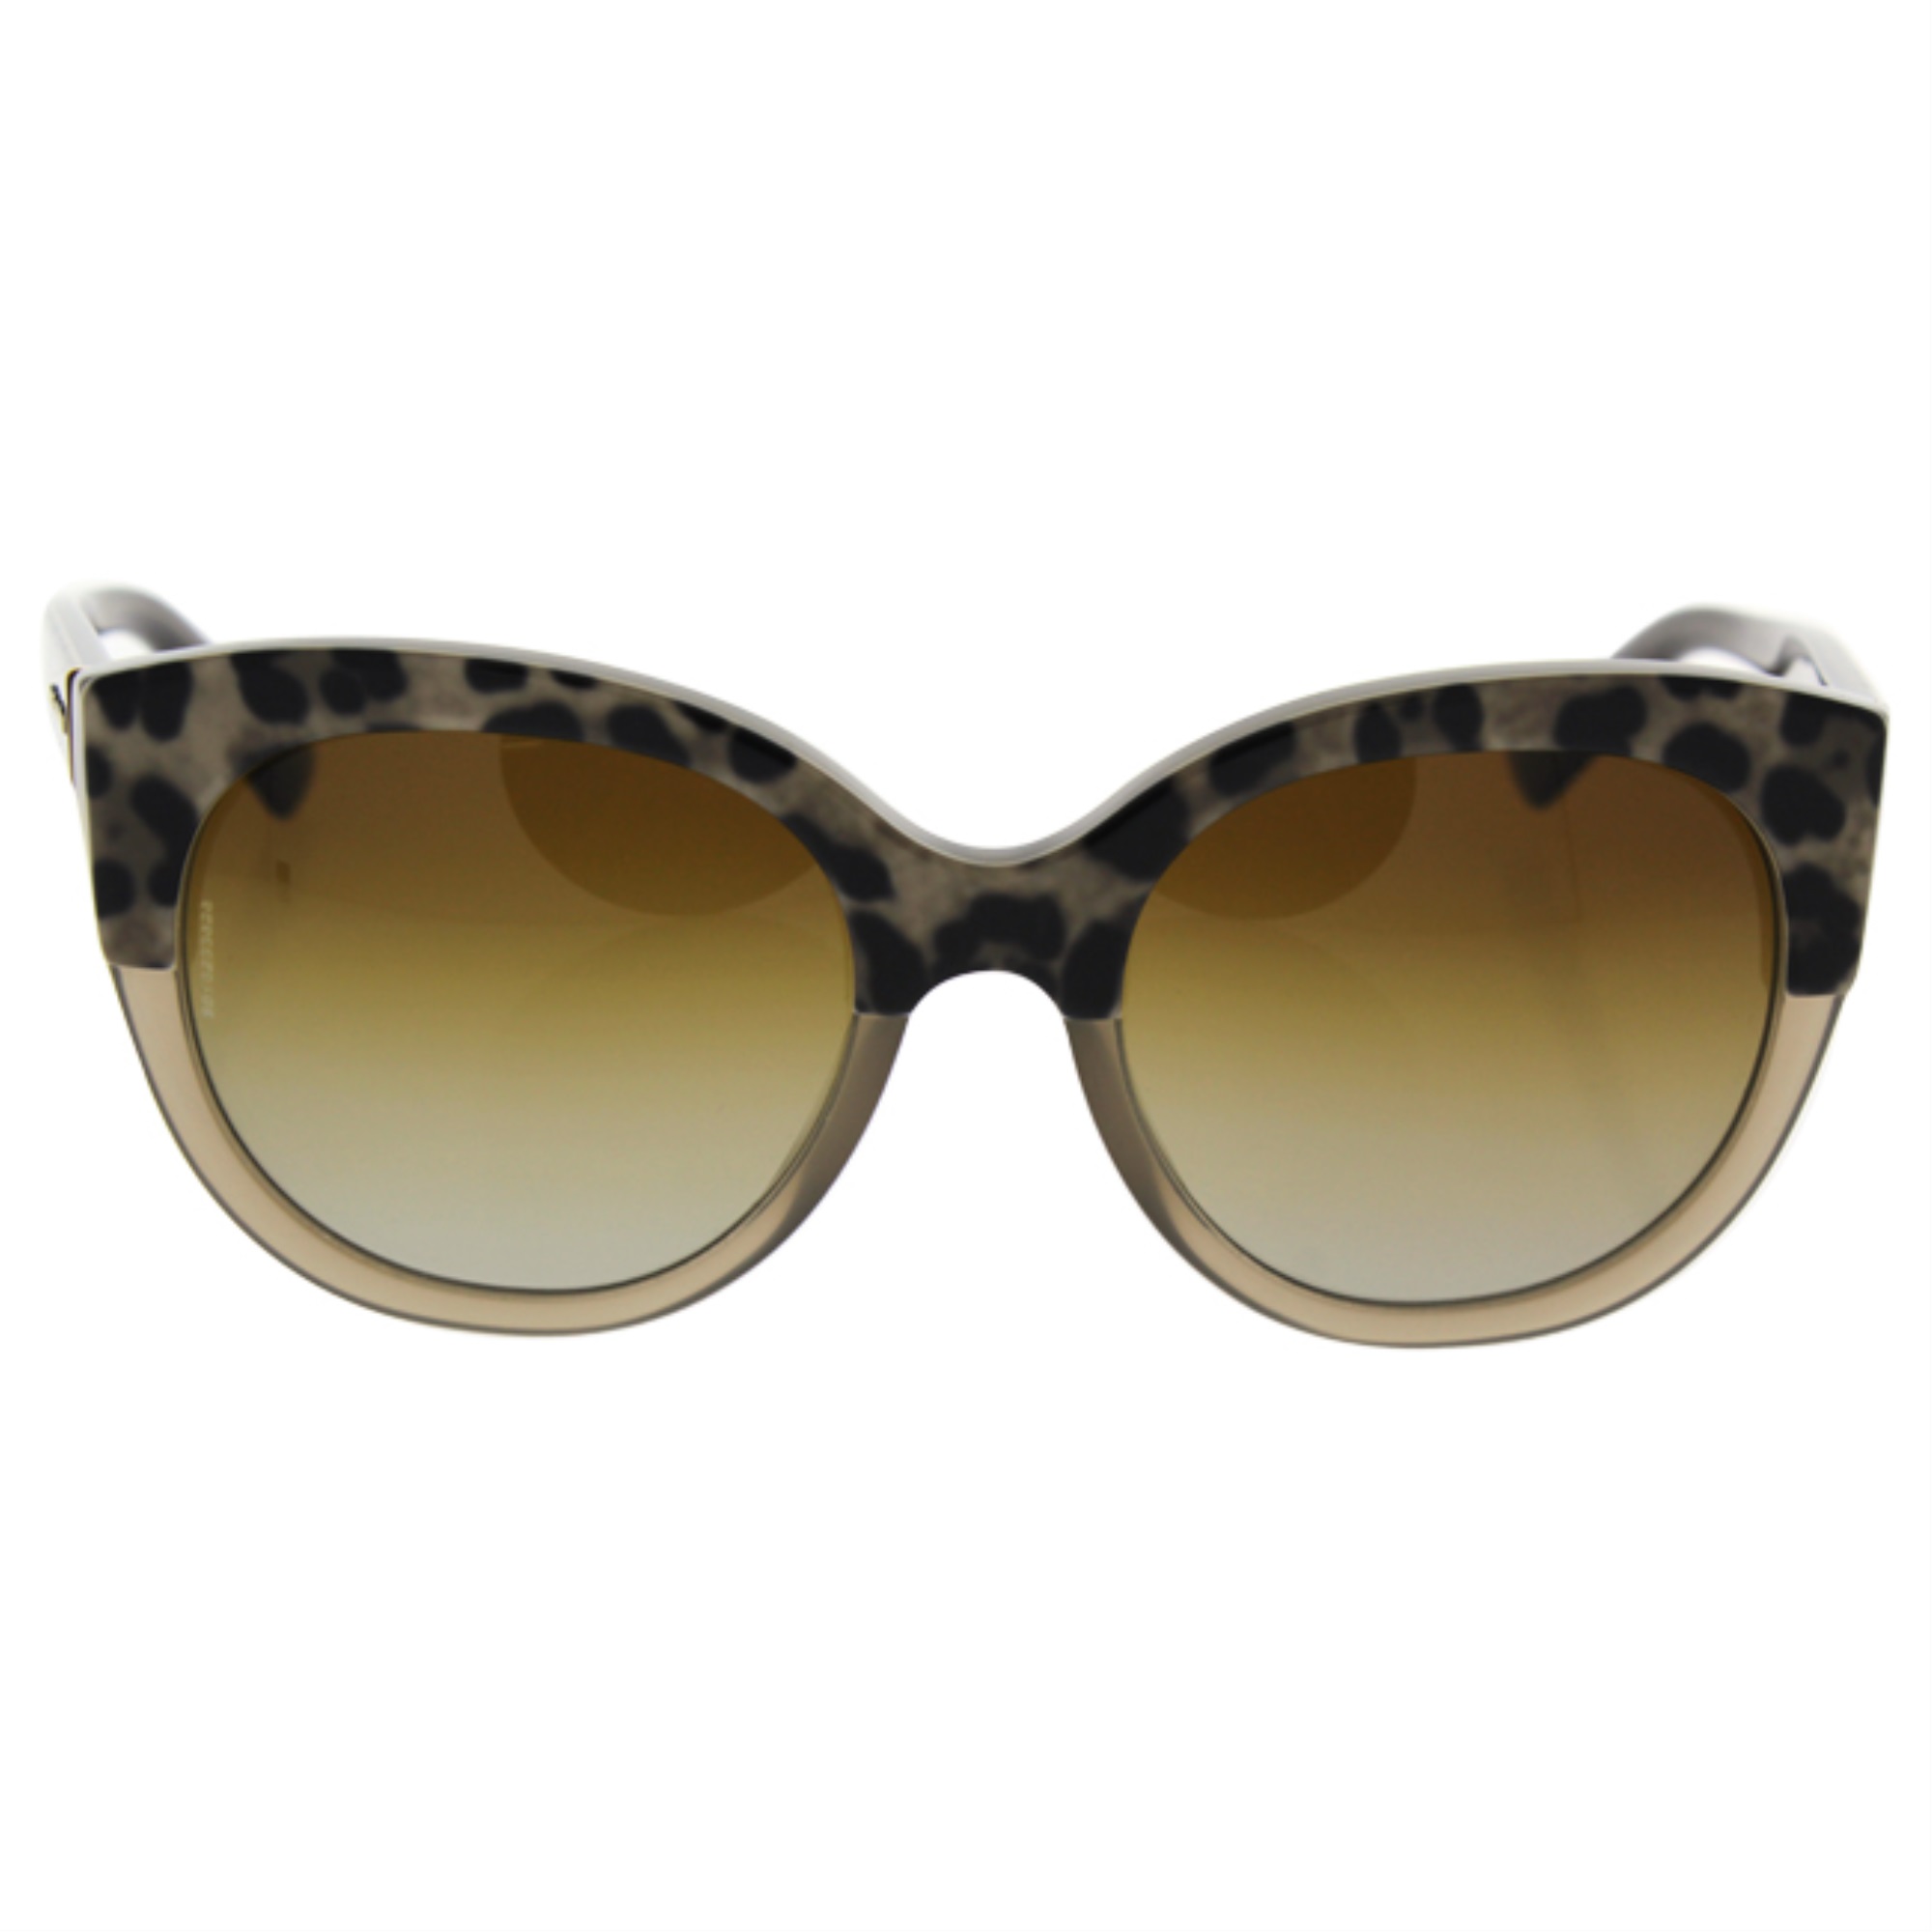 Dolce & Gabbana Dolce and Gabbana DG 4259 2967/T5 - Top Mud On Animalier/Brown Gradient Polarized by Dolce and Gabbana for Women - 56-20-140 m